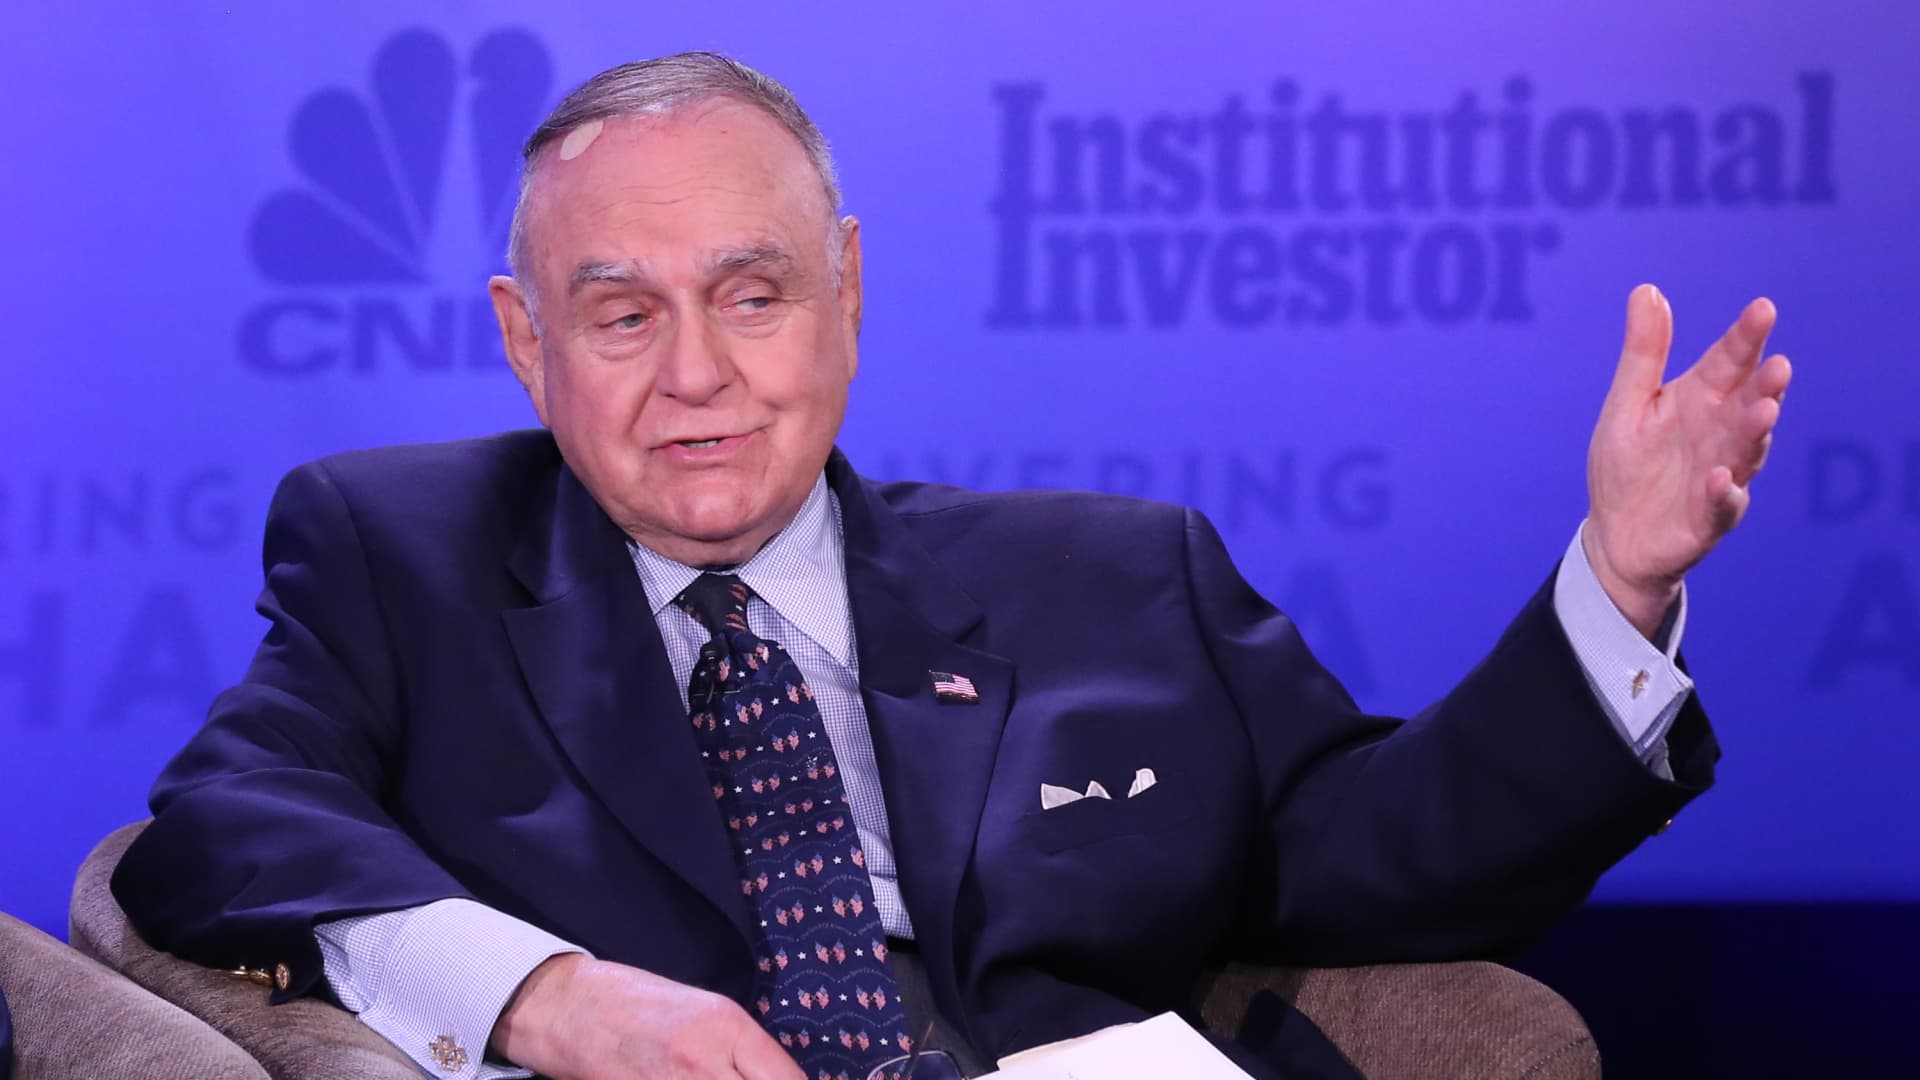 Leon Cooperman expects 2023 recession says ‘bottom is not in yet’ – CNBC